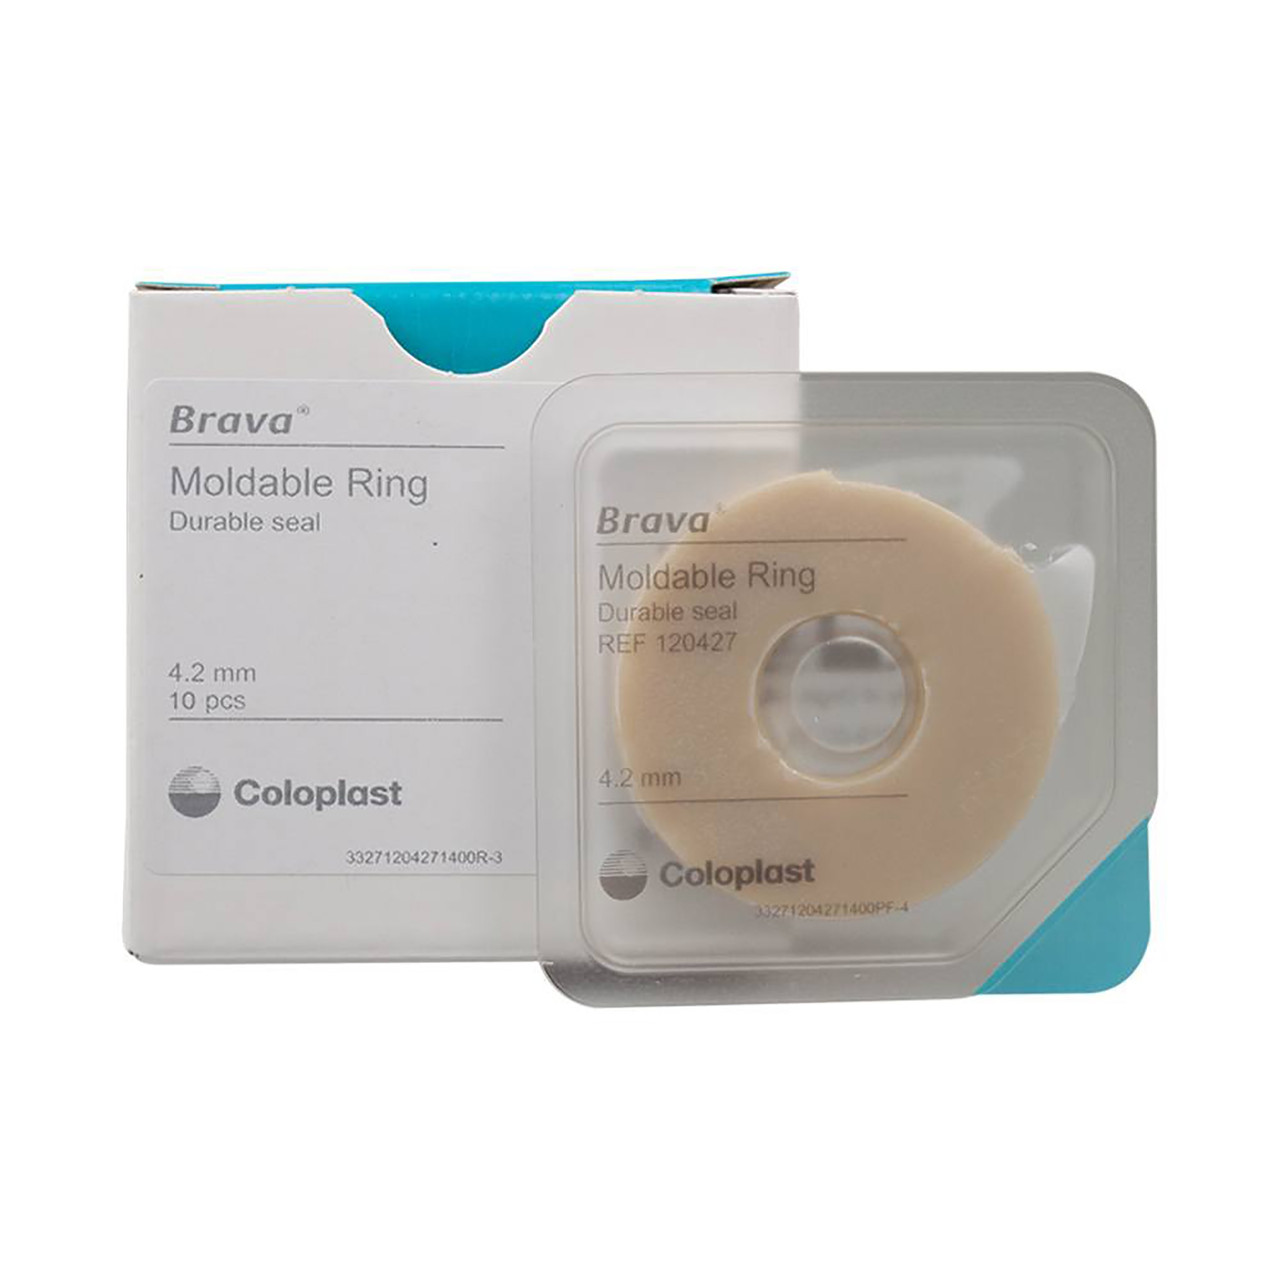 Brava Brava Ostomy Care Mouldable Ring Item 12042 - Wellwise by